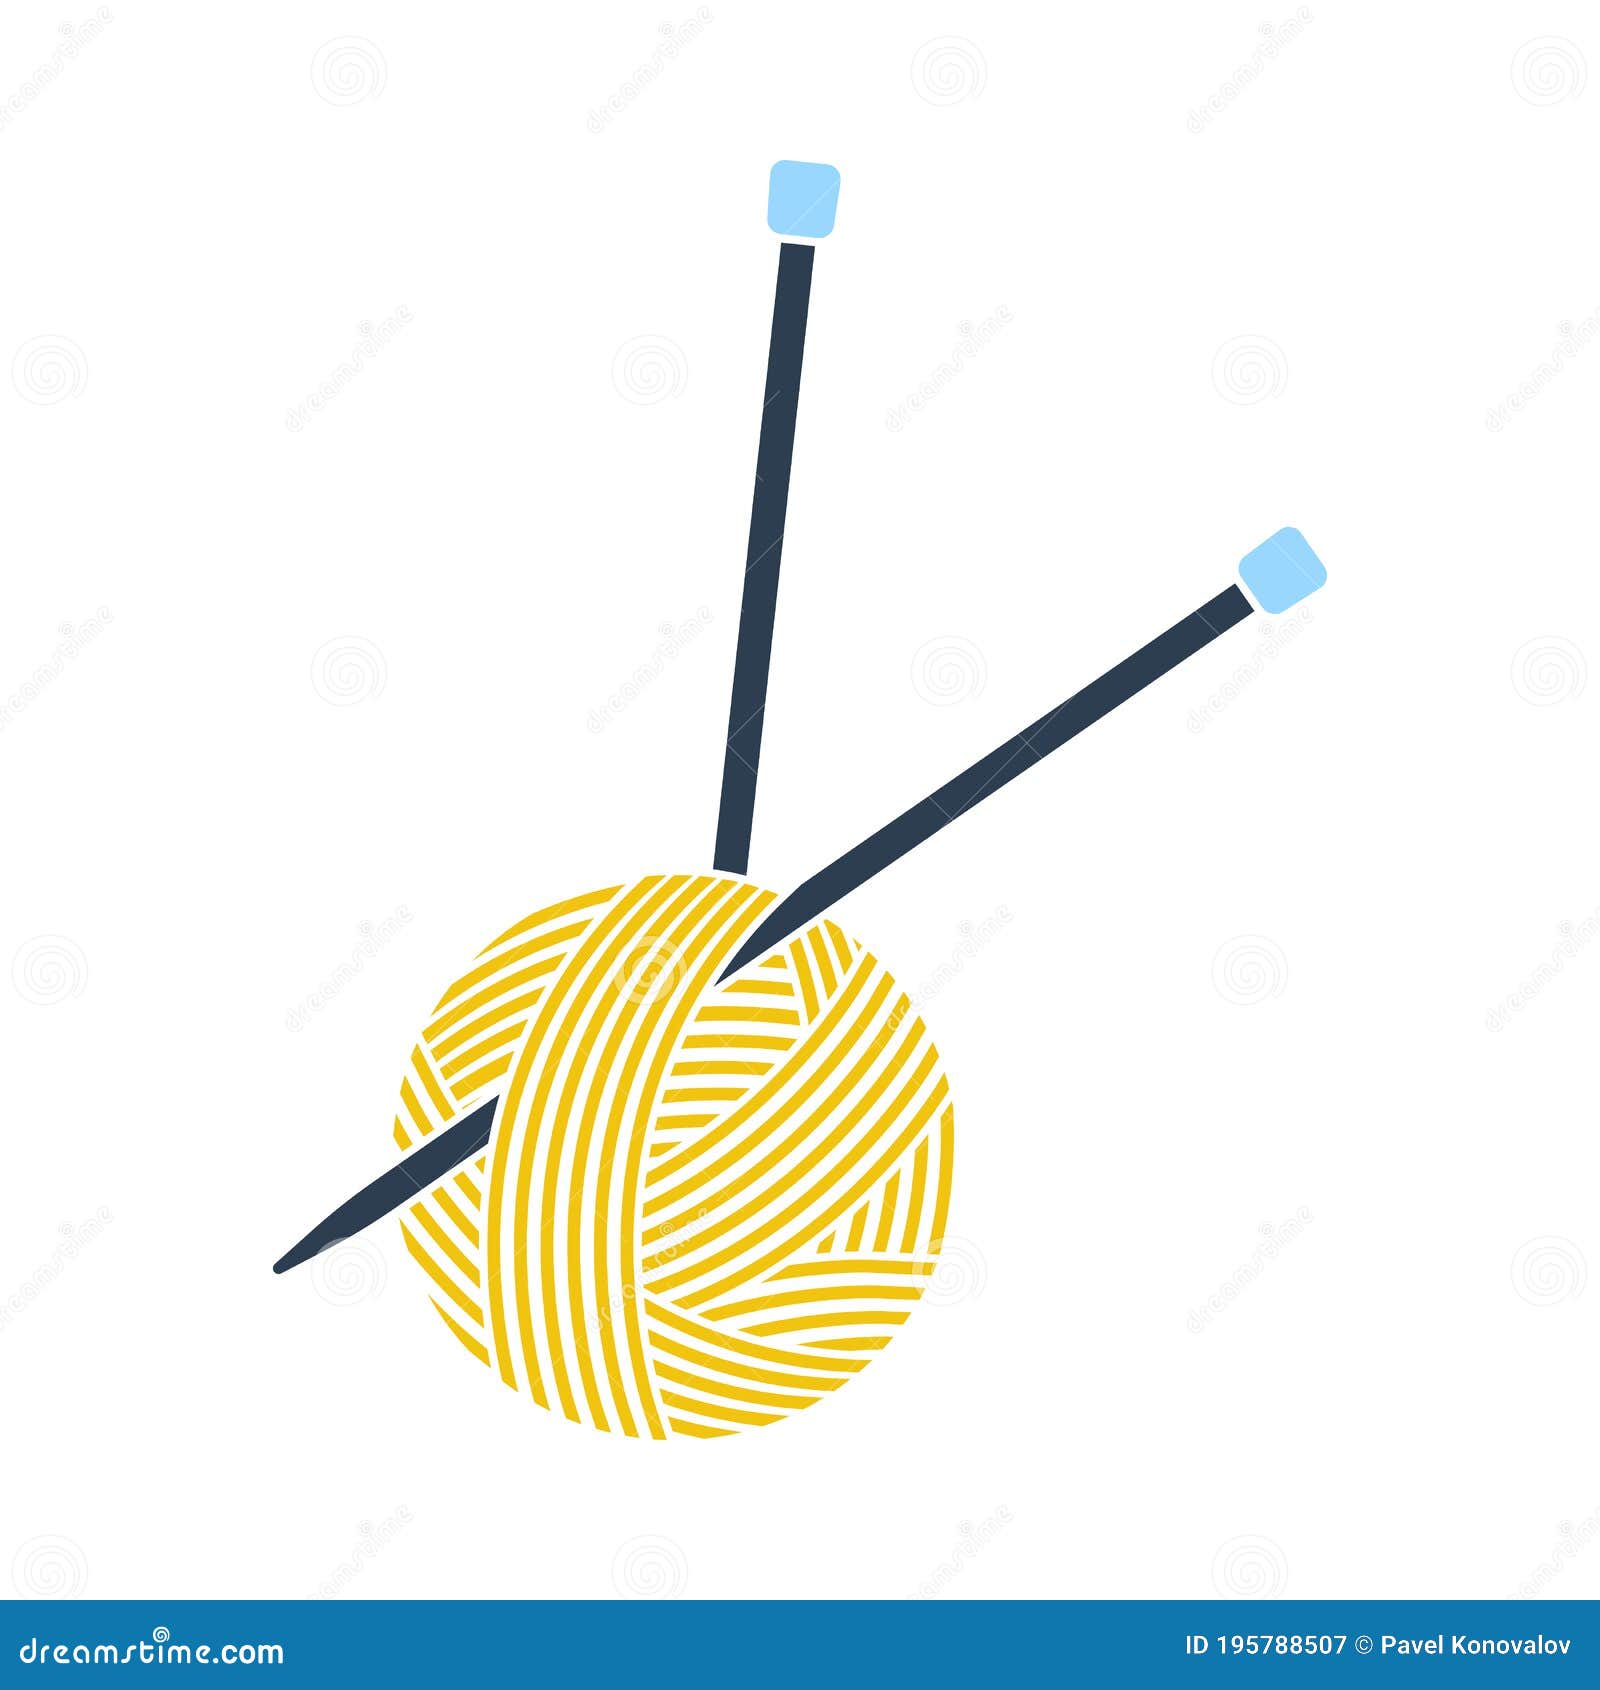 Yarn Ball with Knitting Needles Icon Stock Vector - Illustration of ...